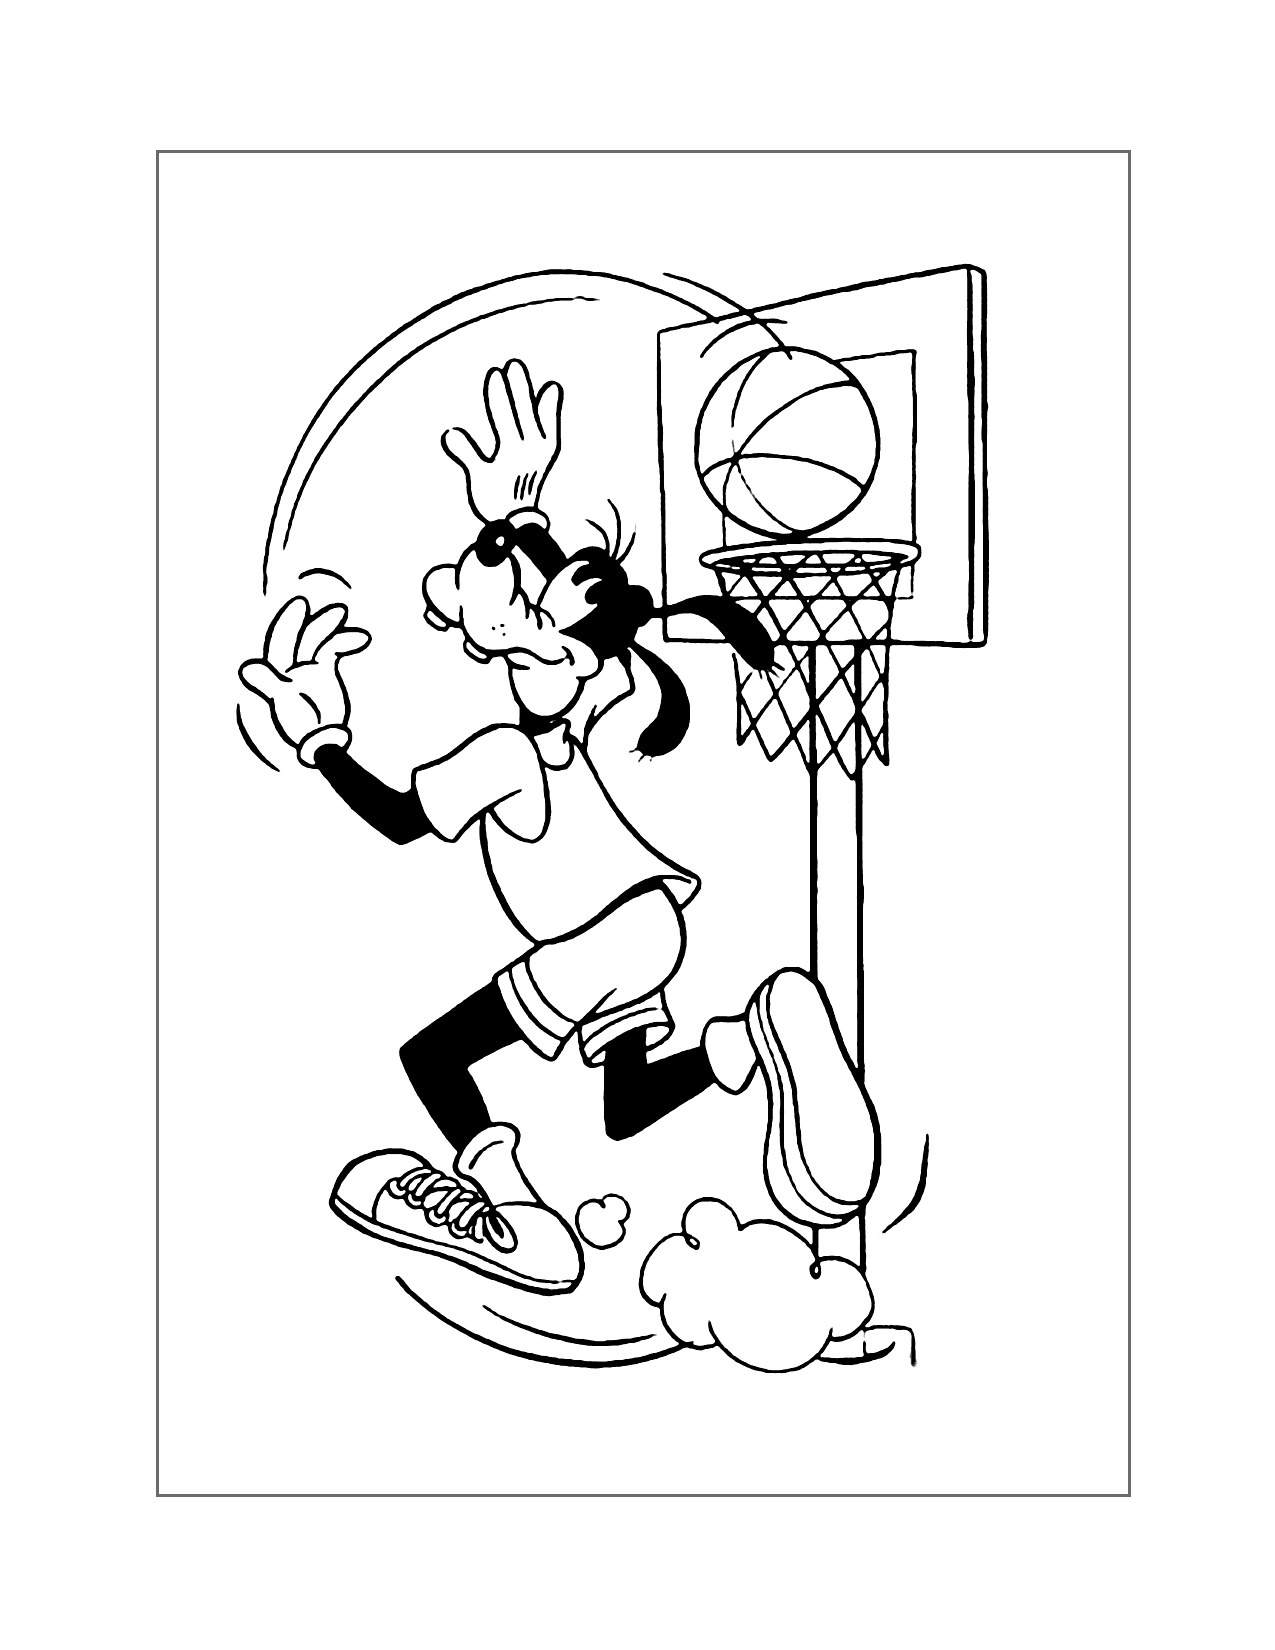 Goofy Plays Basketball Coloring Page